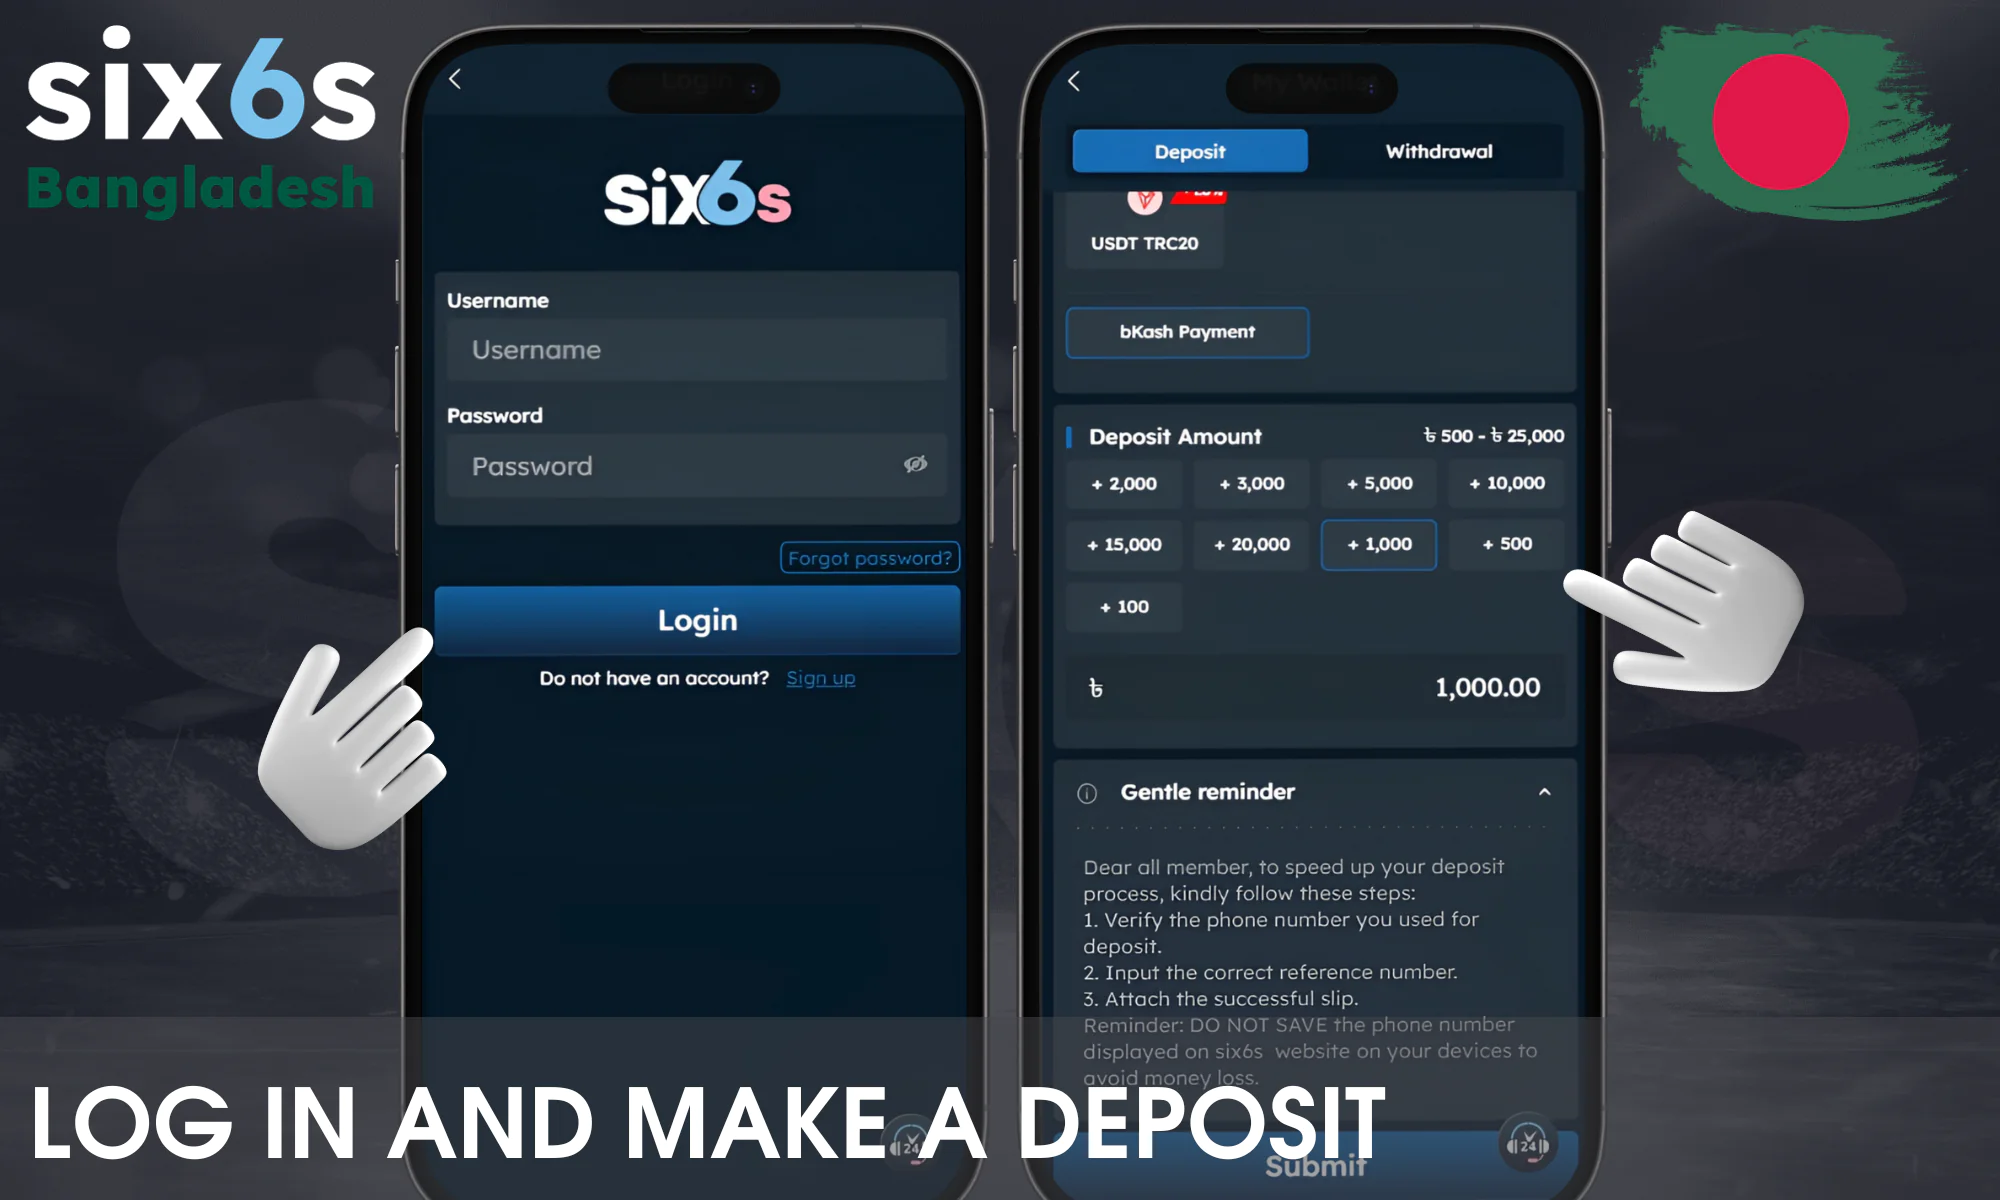 Log in and make a deposit